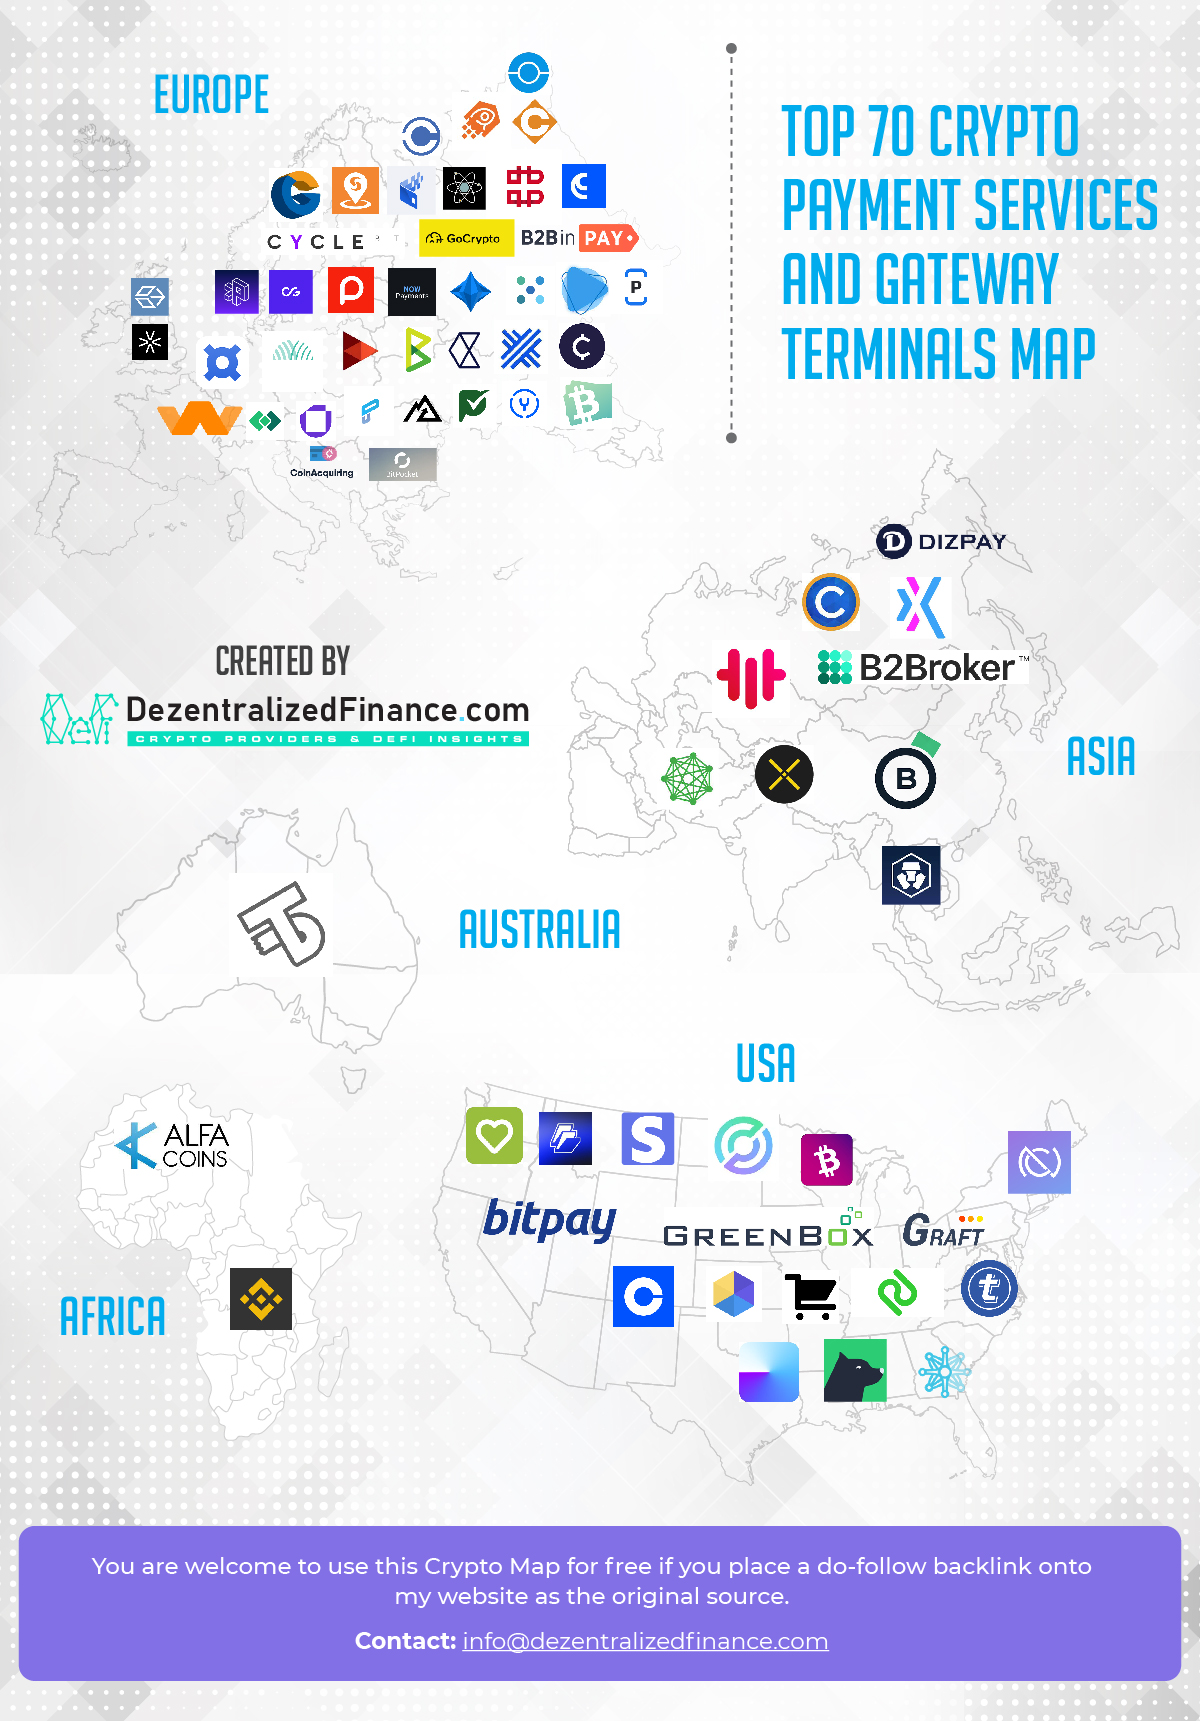 Top 70 Crypto Payment Services and Gateway Terminals